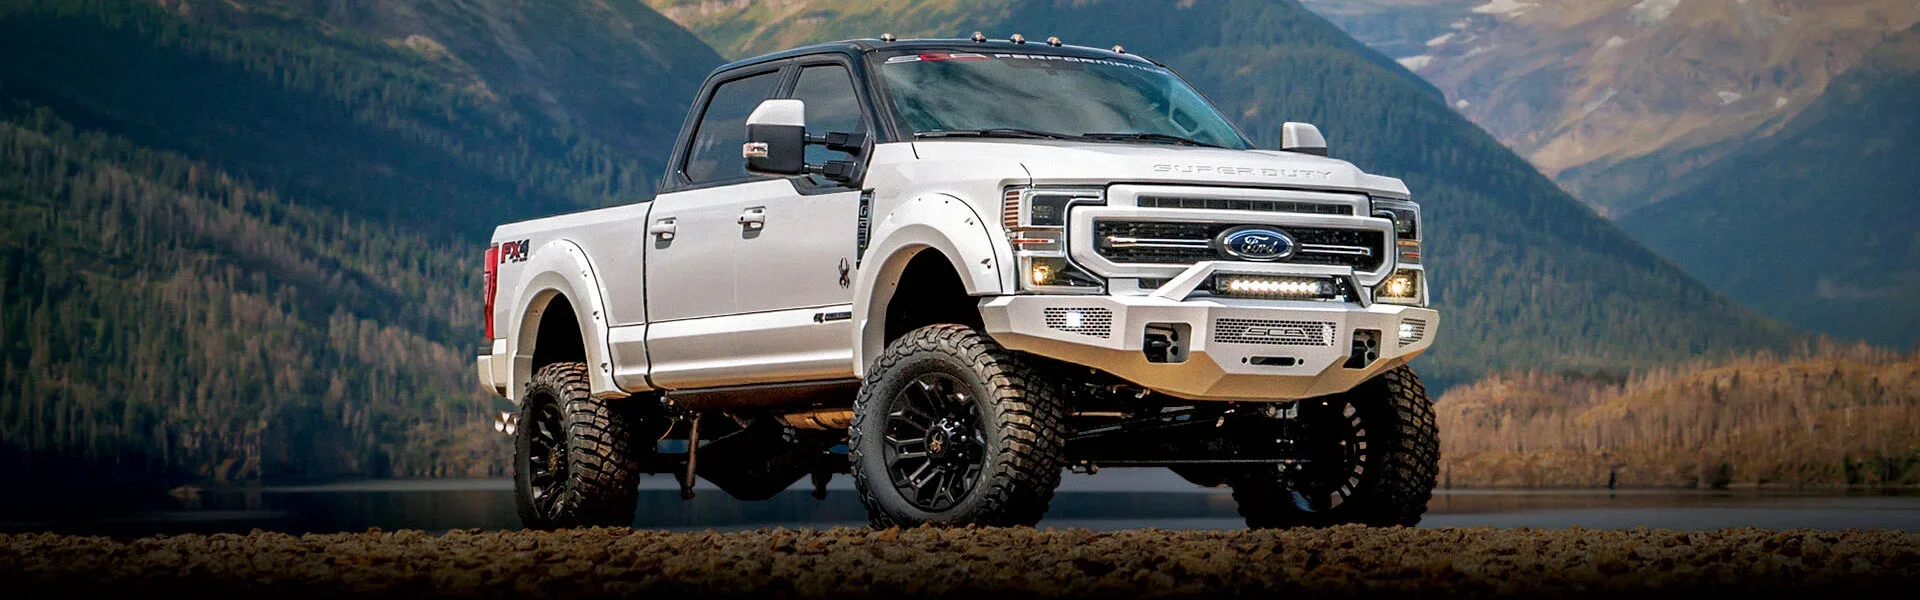 Ford Super Duty | Pilson Chevrolet Buick GMC in Clinton IN